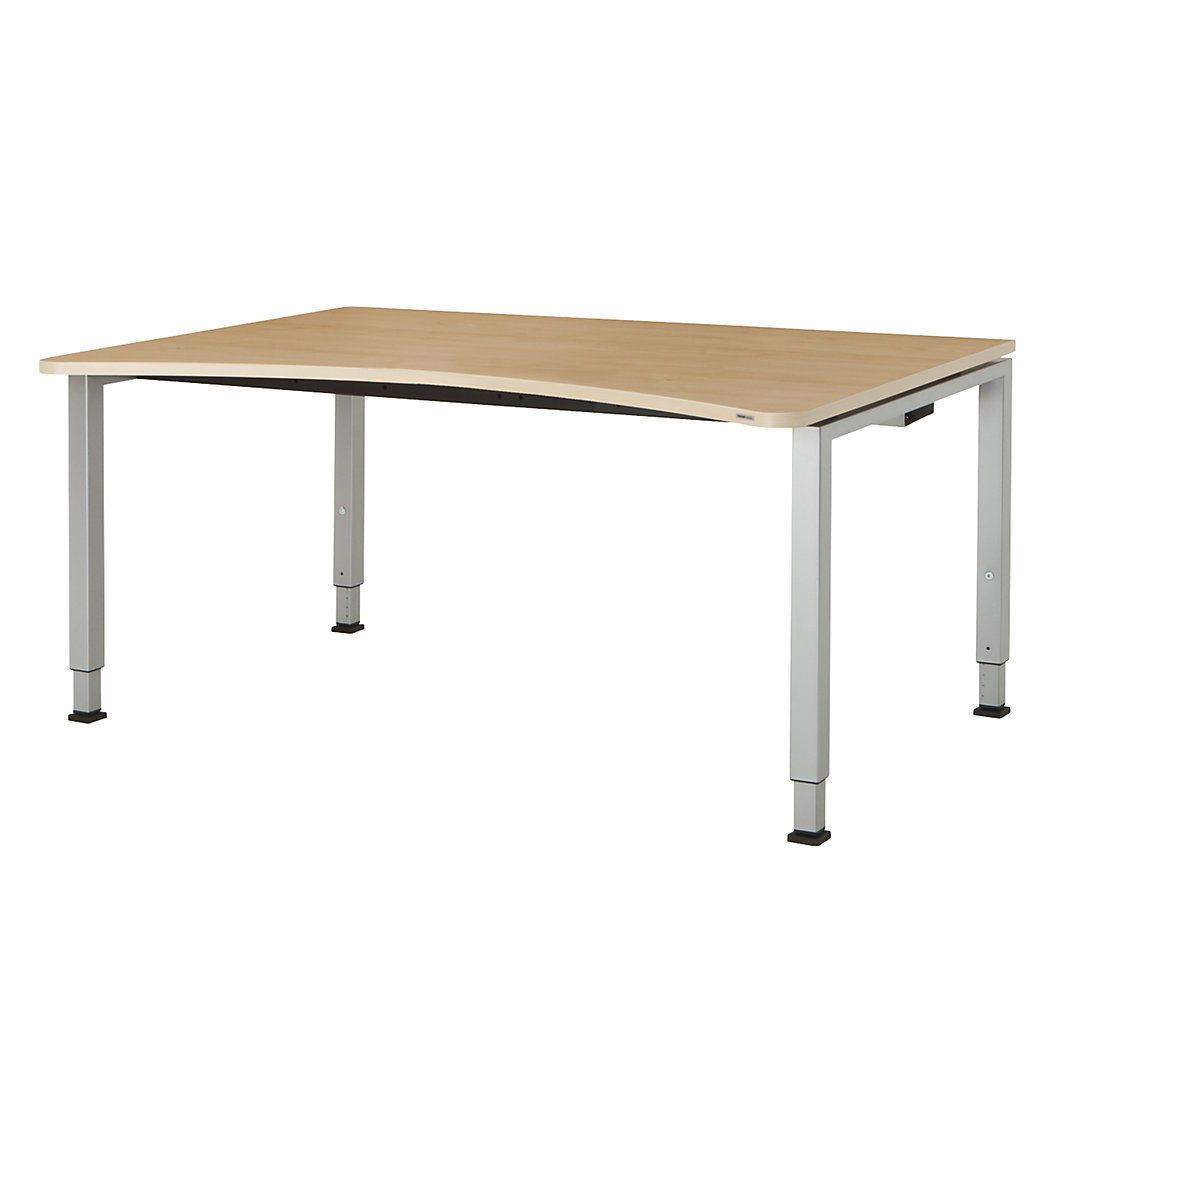 Free-form table, height adjustable - mauser